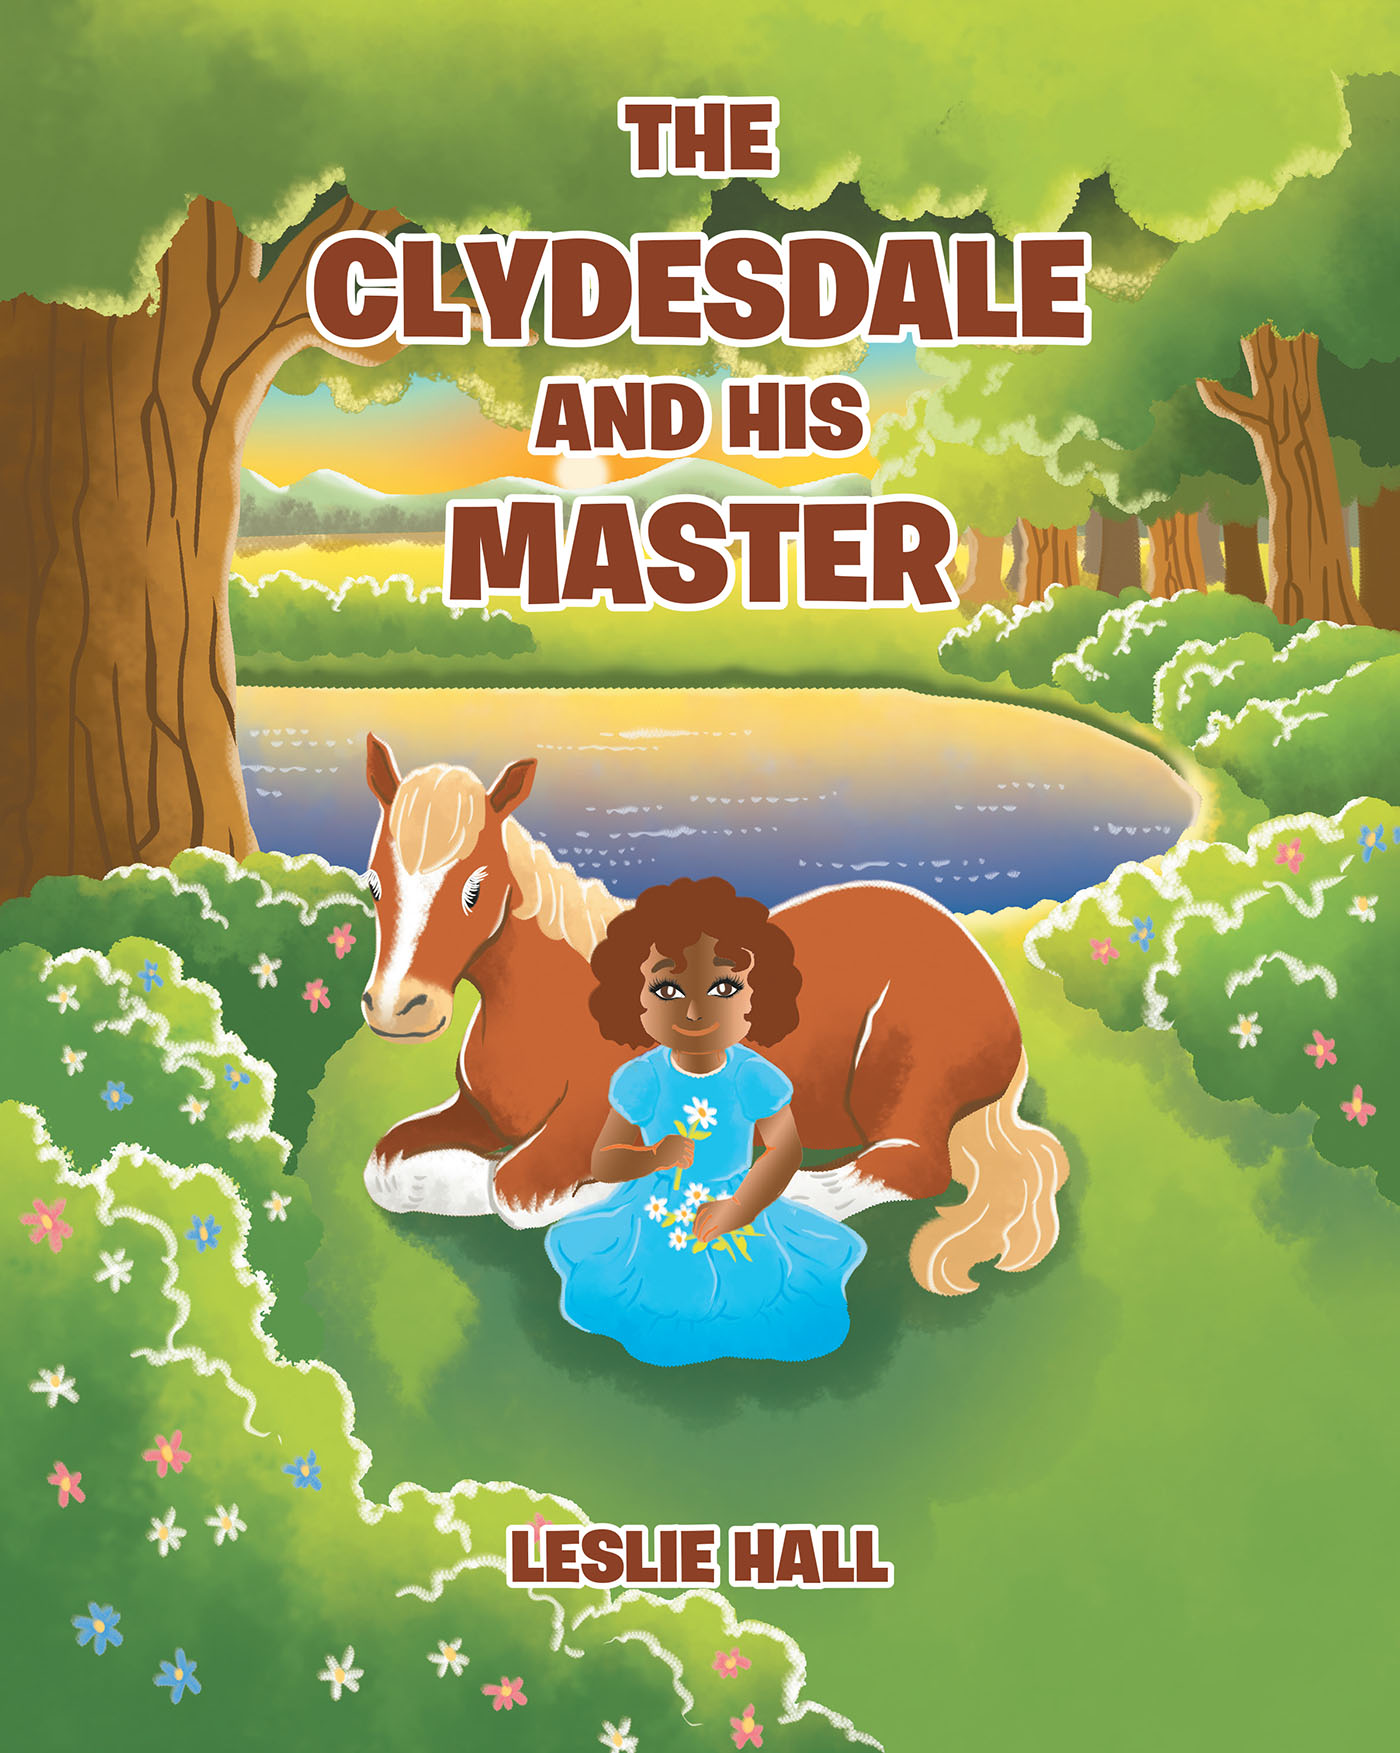 Author Leslie Hall’s New Book, "The Clydesdale and His Master," is a Meaningful Children’s Story About the Importance of Treating Others with Kindness